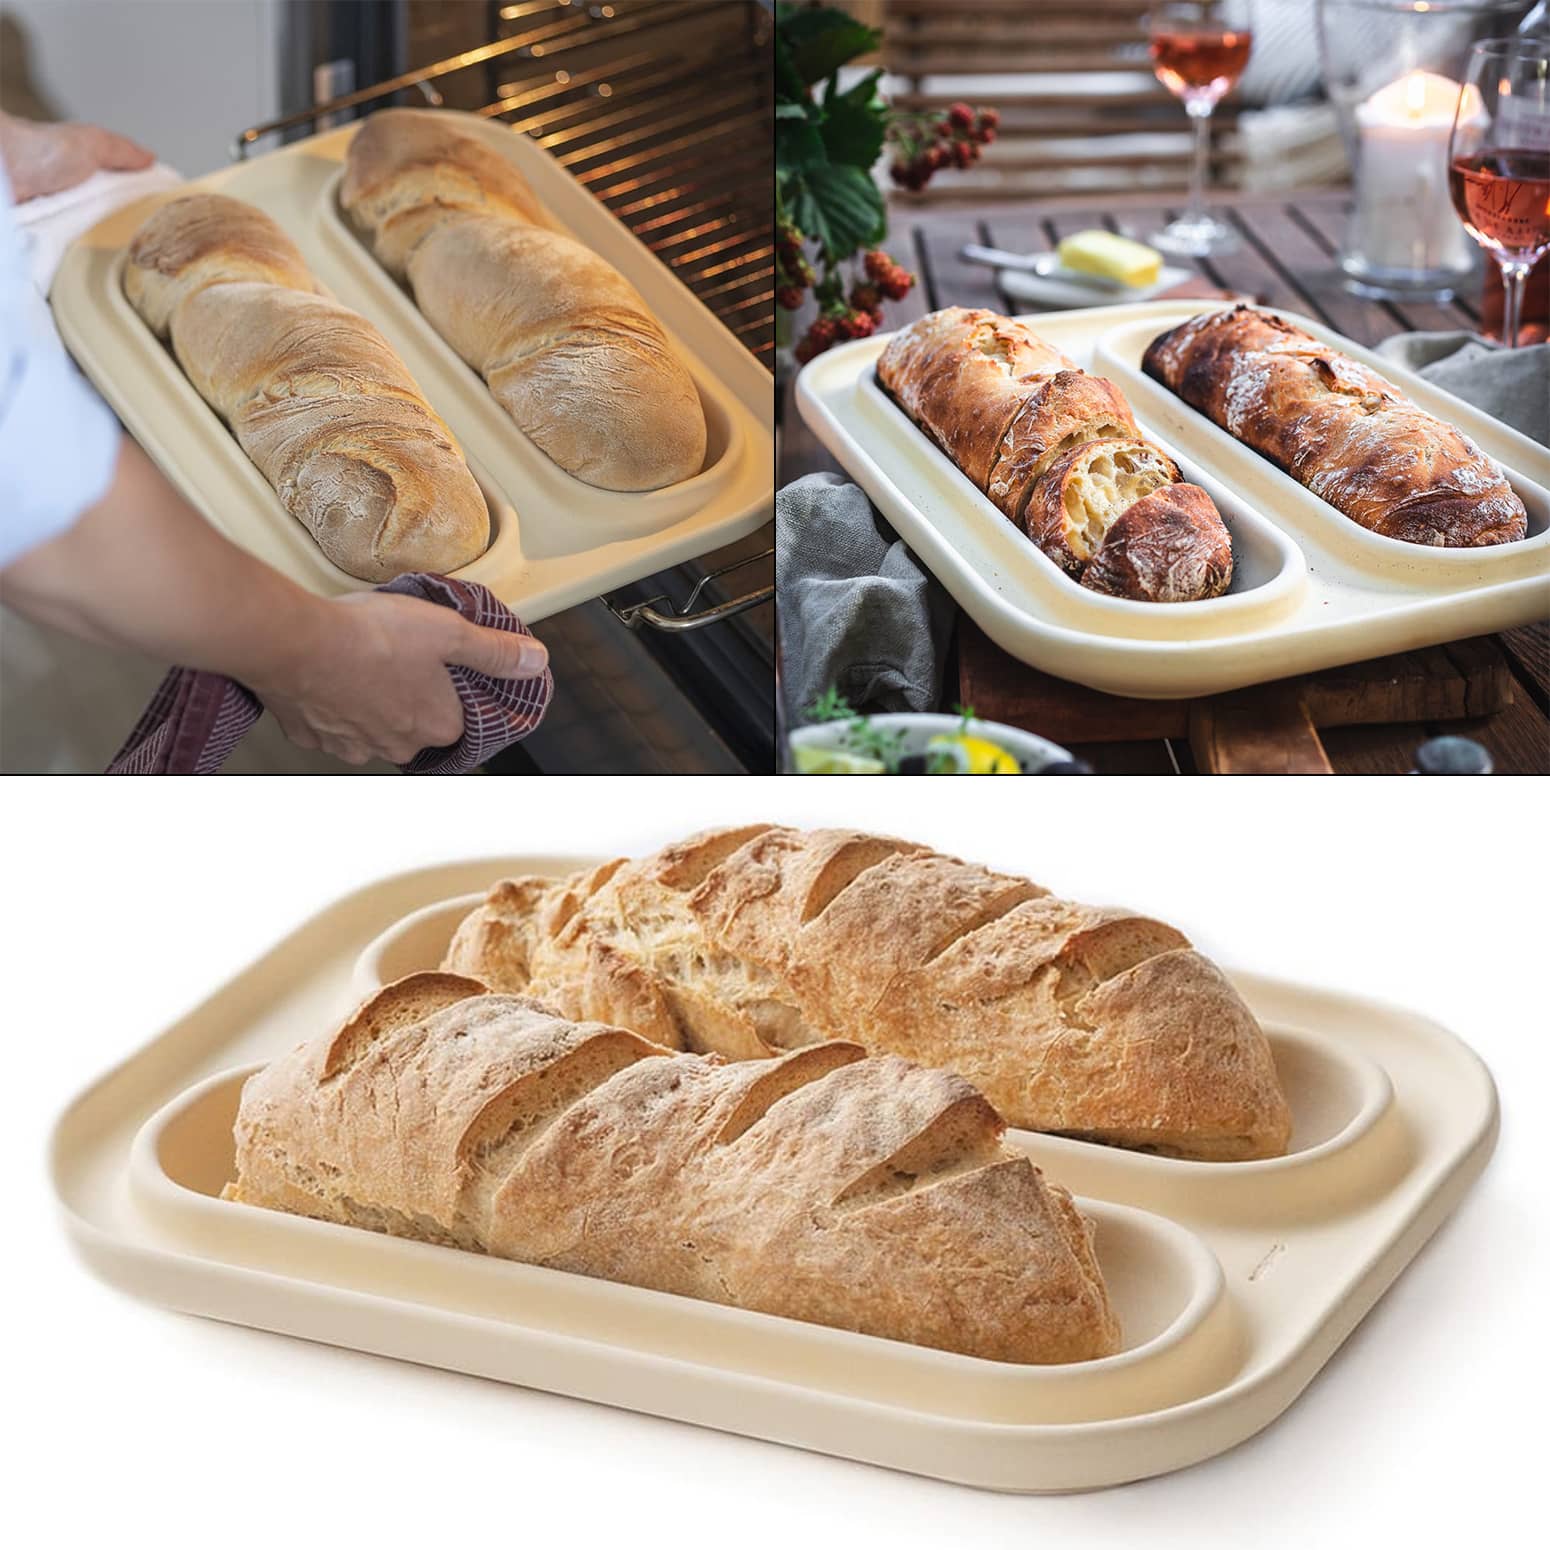 Ceramic Baguette Baker - Water Channel Creates a Heat Dome for Crispy Crusts